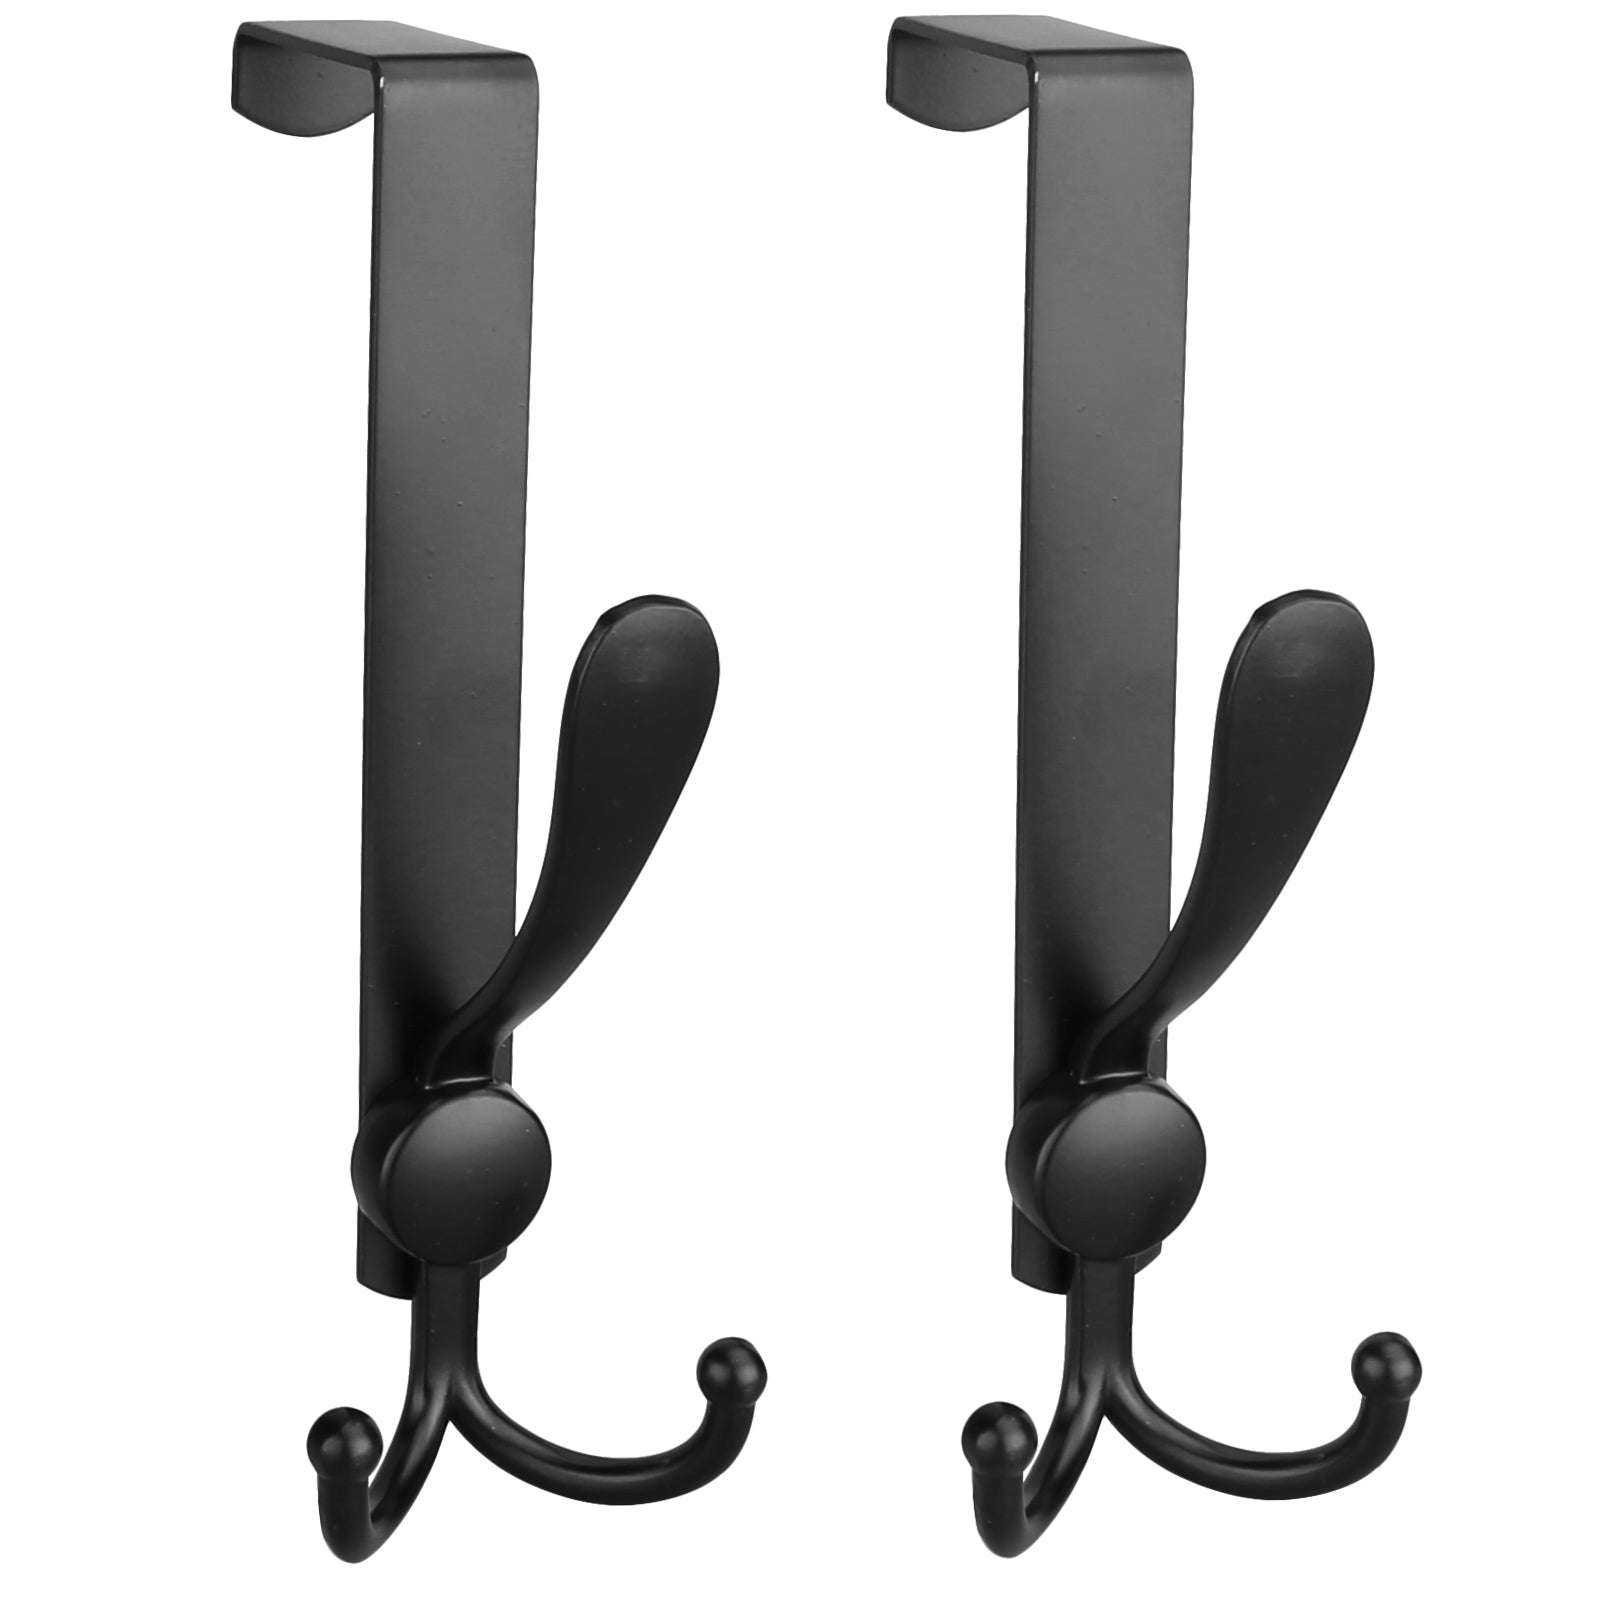  Self Adhesive Coat Hooks For Hanging, Heavy Duty Stainless Double  Wall Hook For Towel, Backpack, Hat, Sturdy Metal Hanger For Bathroom,  Bedroom, Door, Wall Mounted, 10 Pack, Matt Black